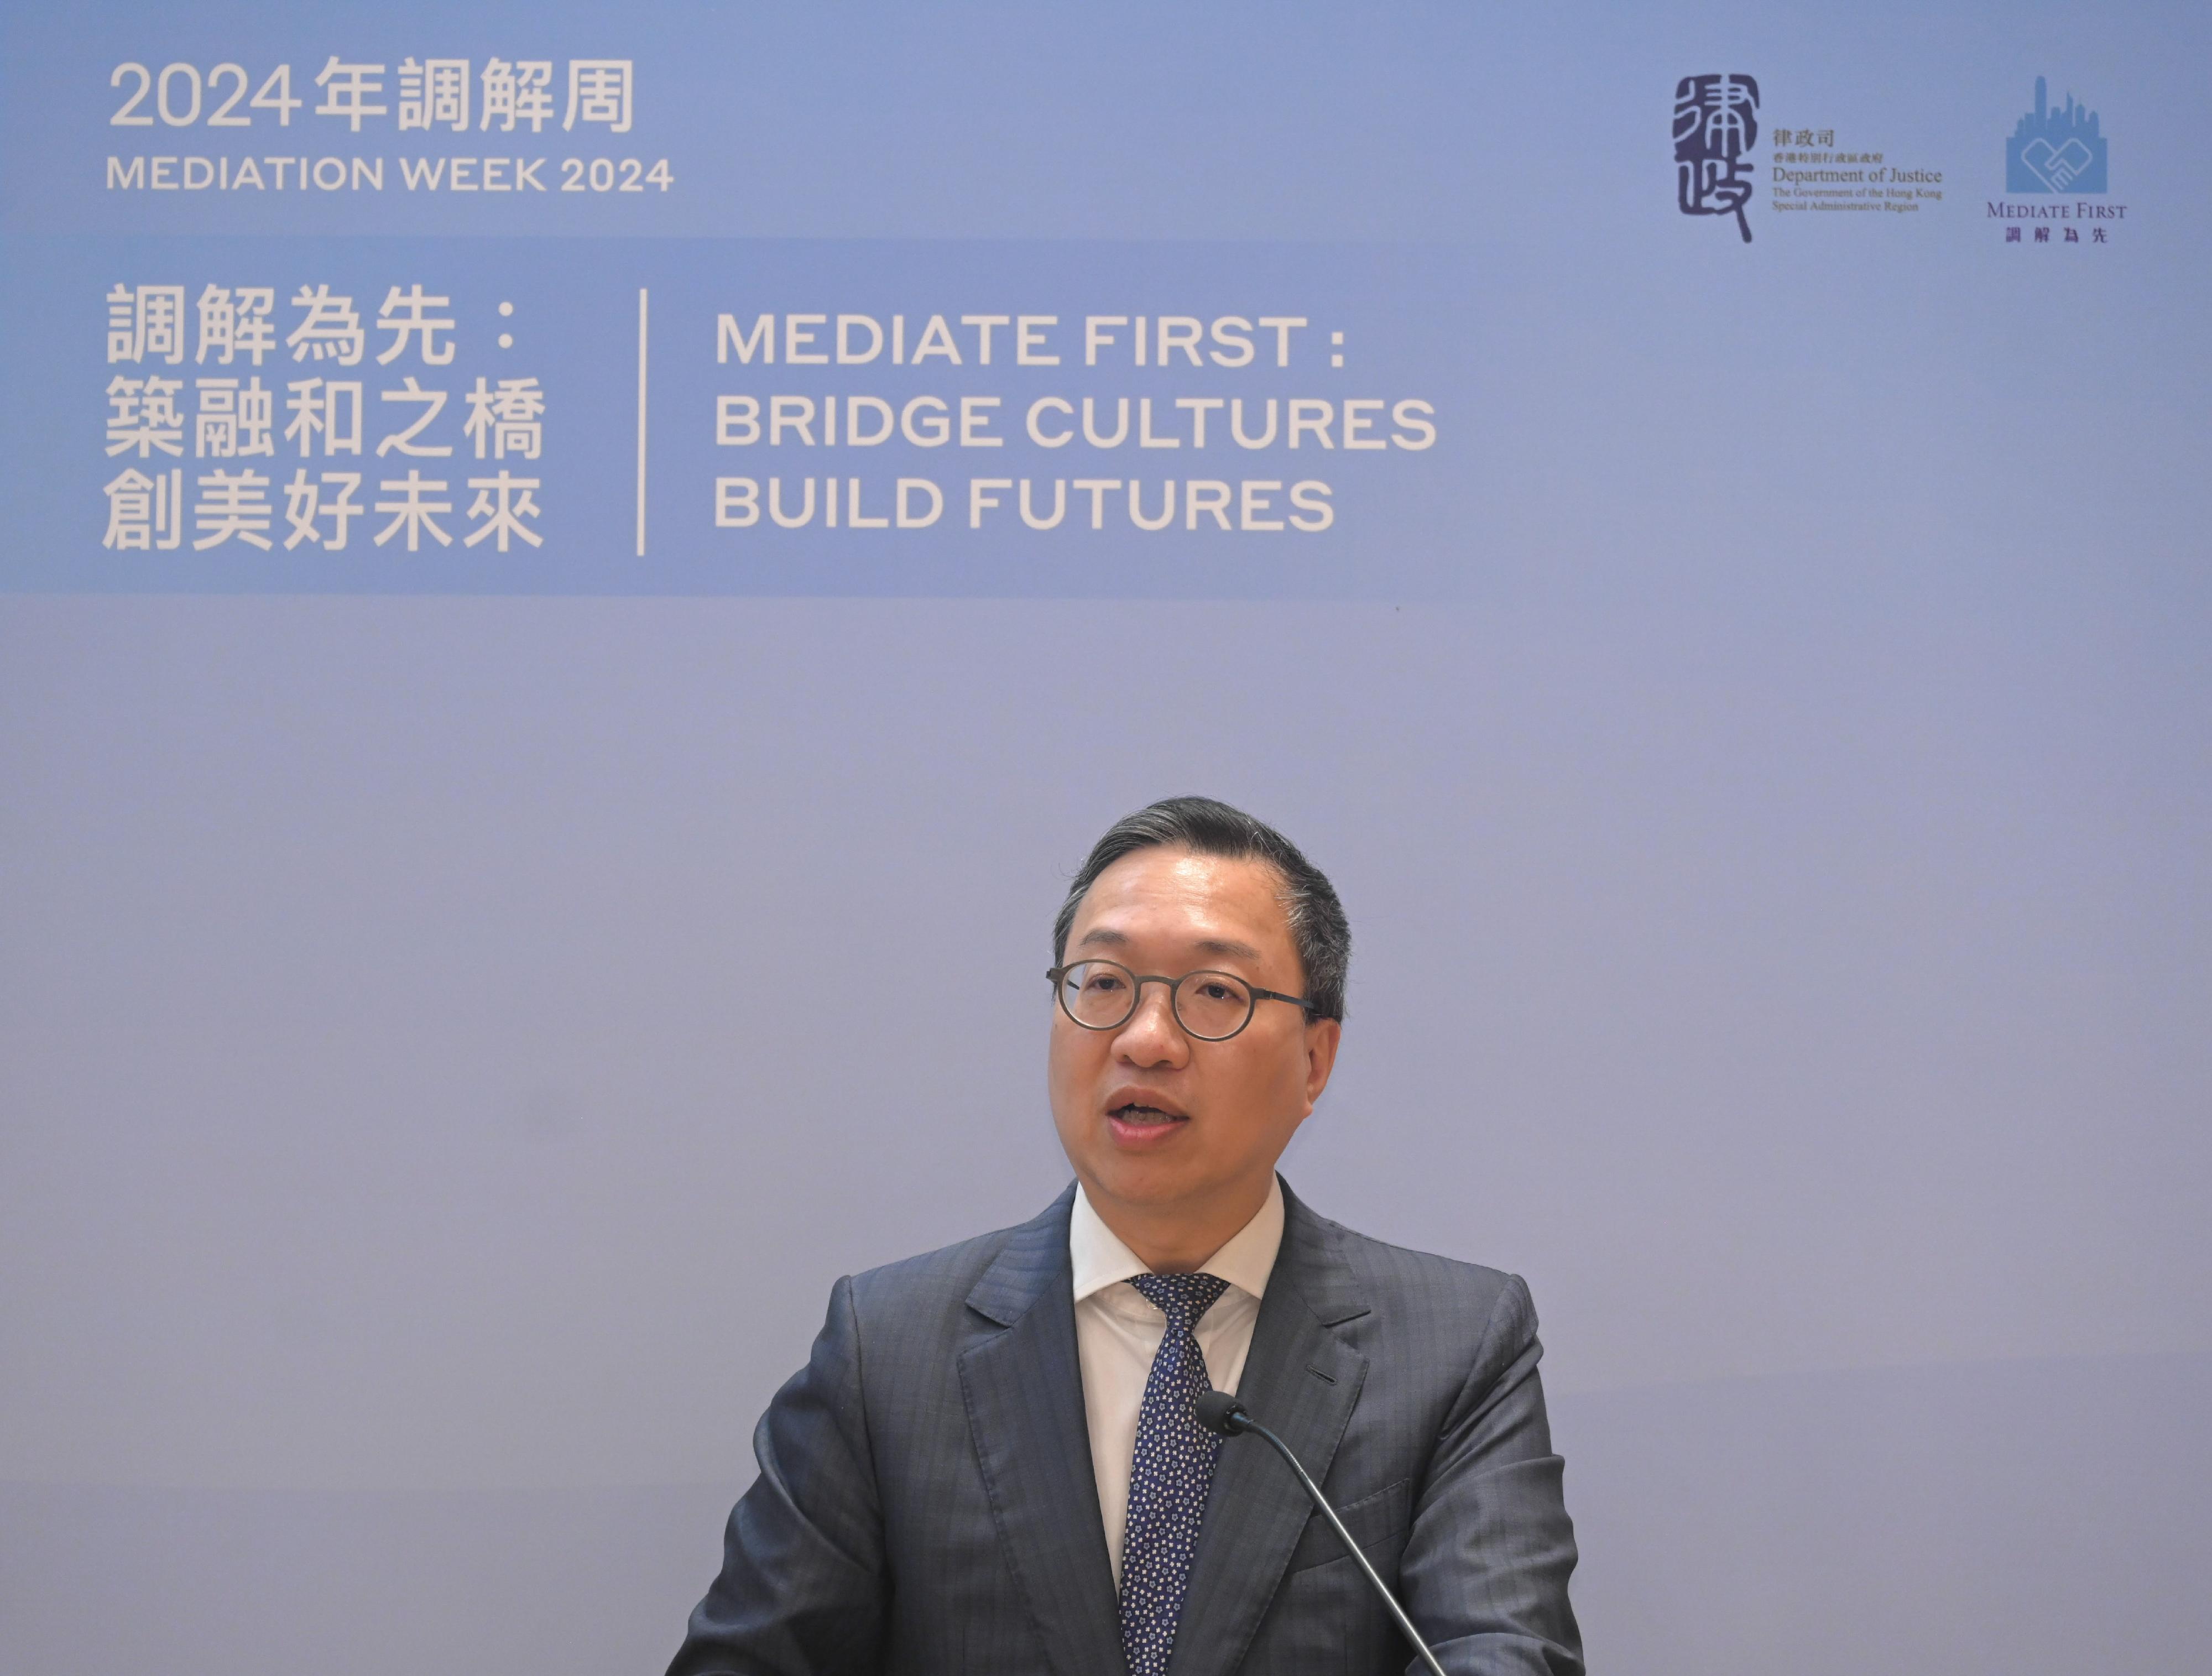 The Mediation Week 2024, a biennial event organised by the Department of Justice, was officially launched today (May 6). The Mediation Week opening was marked by the thematic event: School Mediation Seminar this morning. Photo shows the Secretary for Justice, Mr Paul Lam, SC, delivering his closing remarks.
